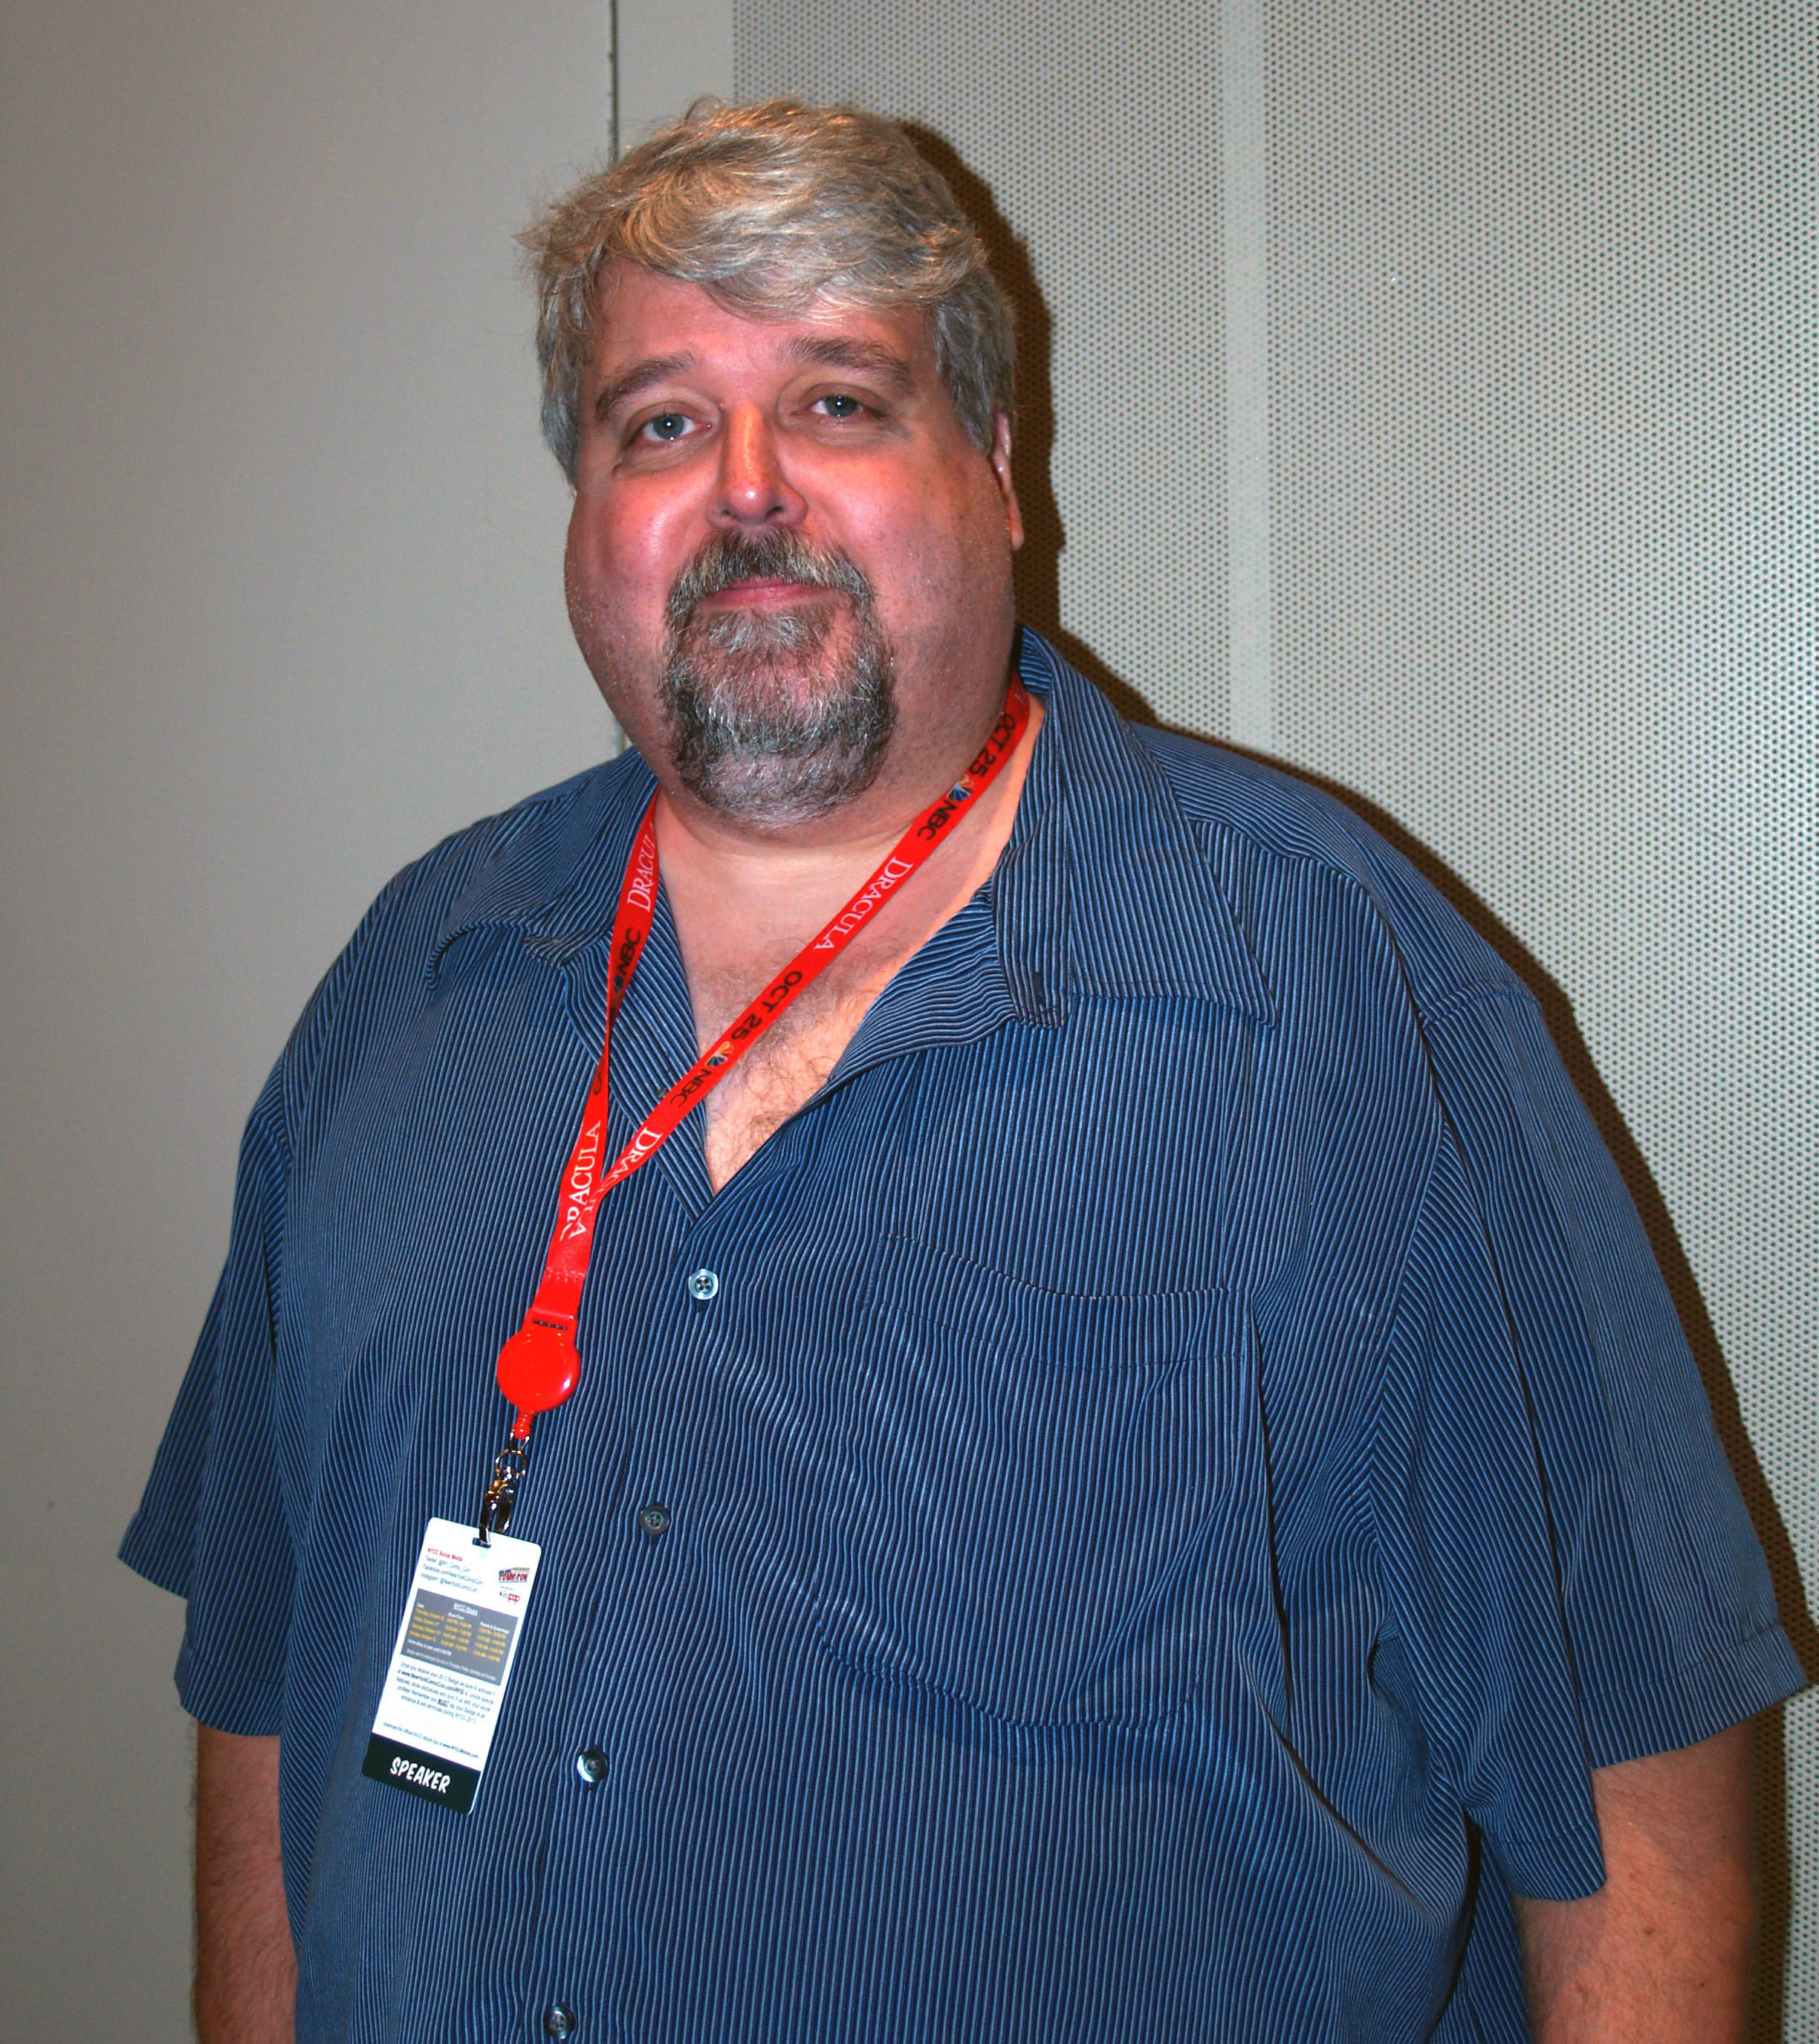 Dunbier at the 2013 [[New York Comic Con]]